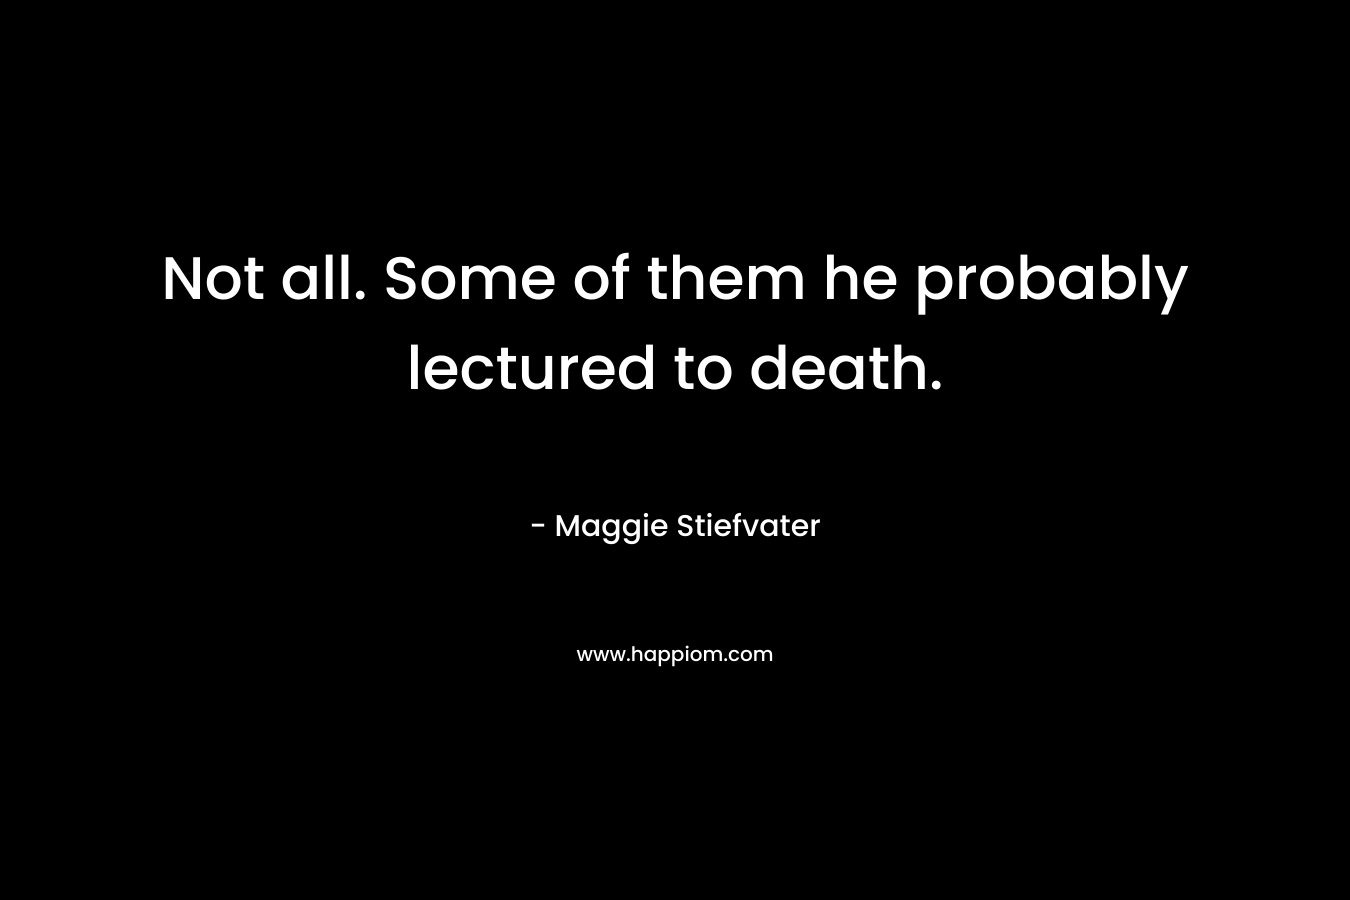 Not all. Some of them he probably lectured to death. – Maggie Stiefvater